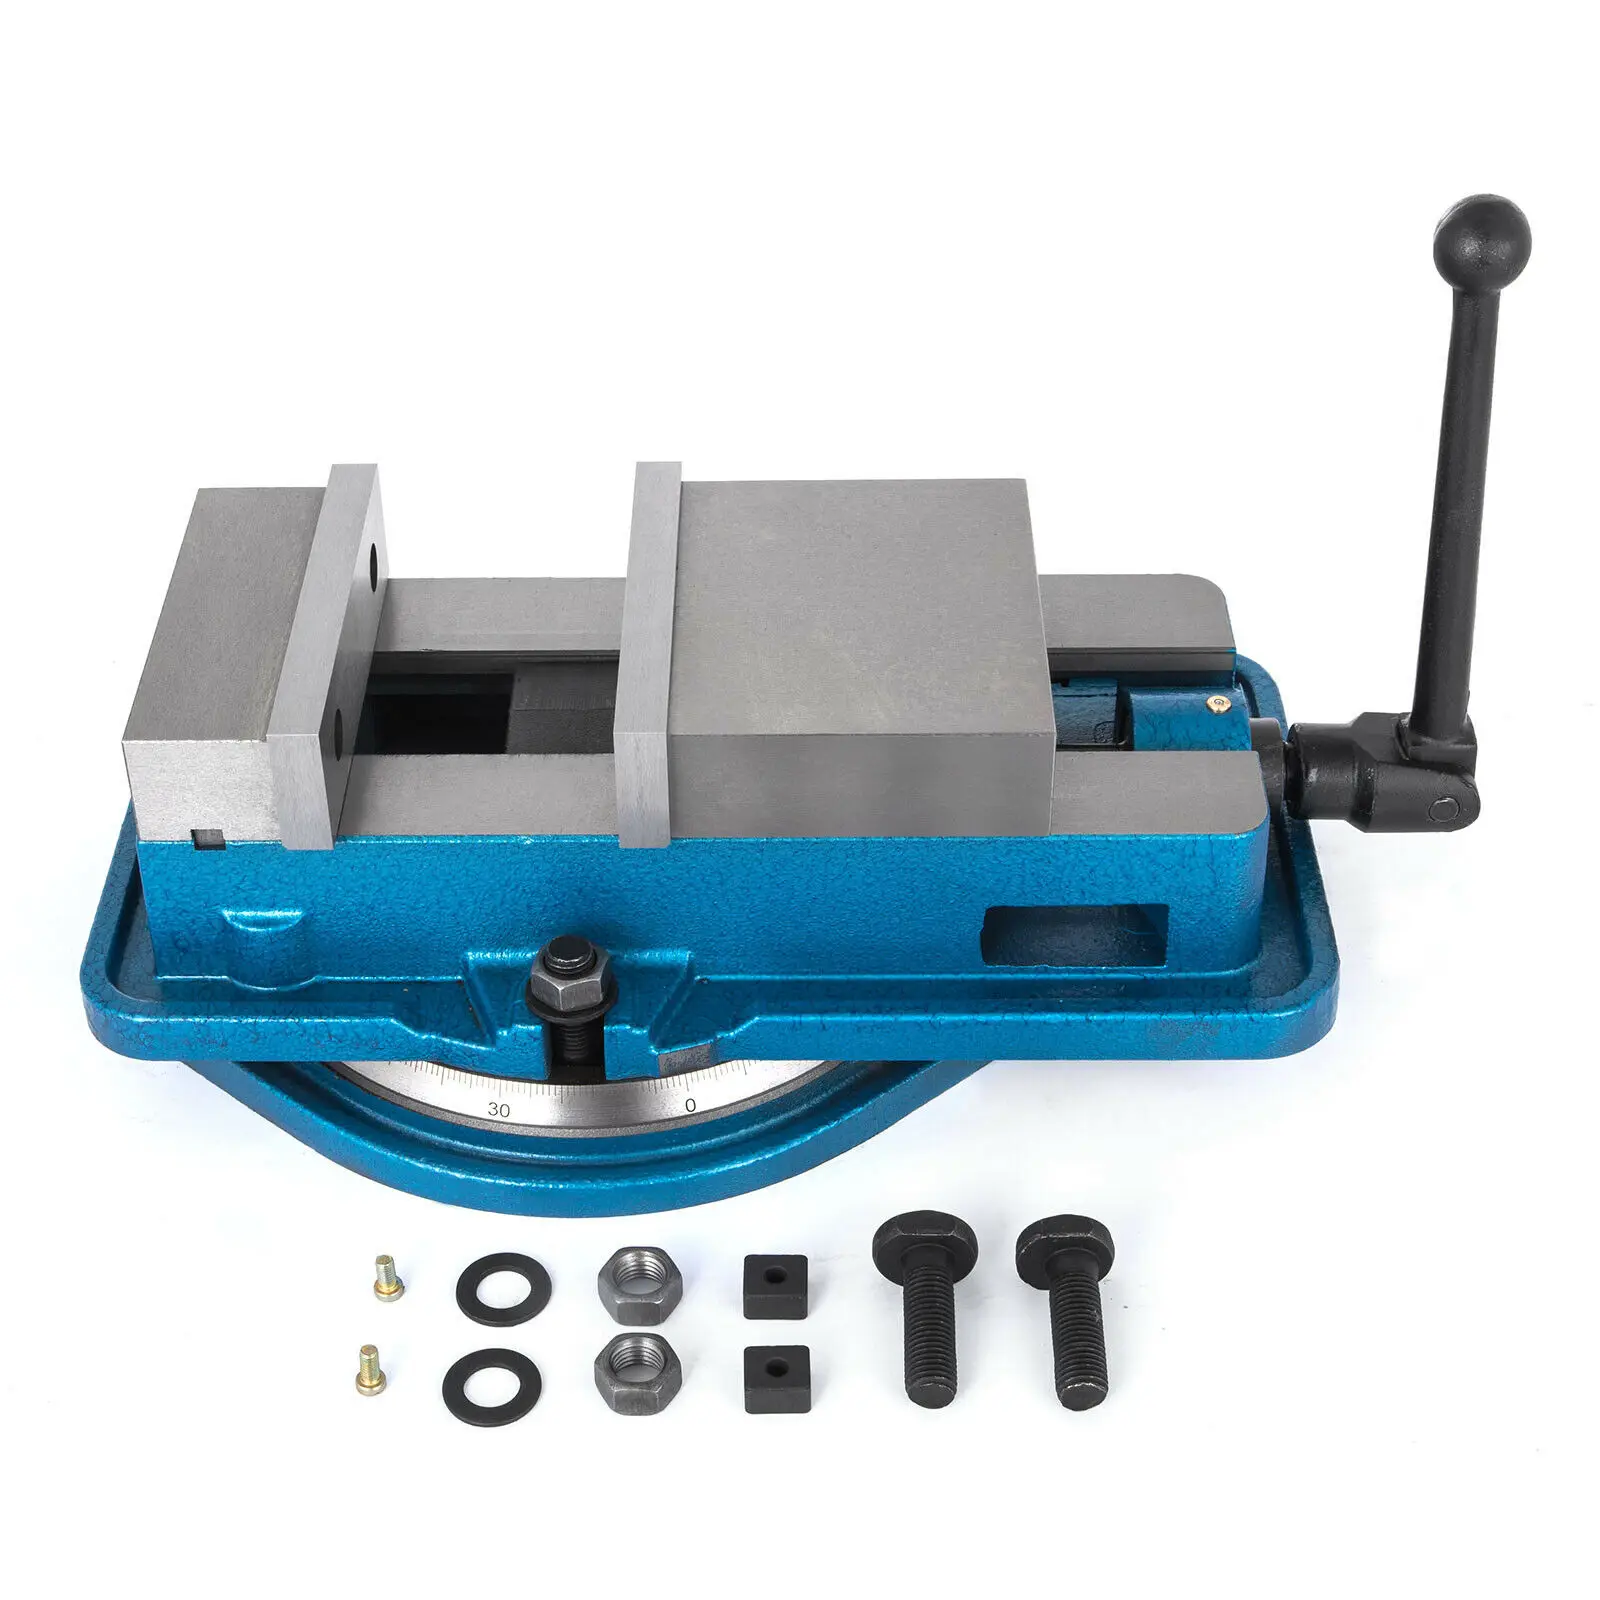 

Convenience 5'' Accu Lock Vise Precision Milling Drilling Machine Bench Clamp Clamping Vice